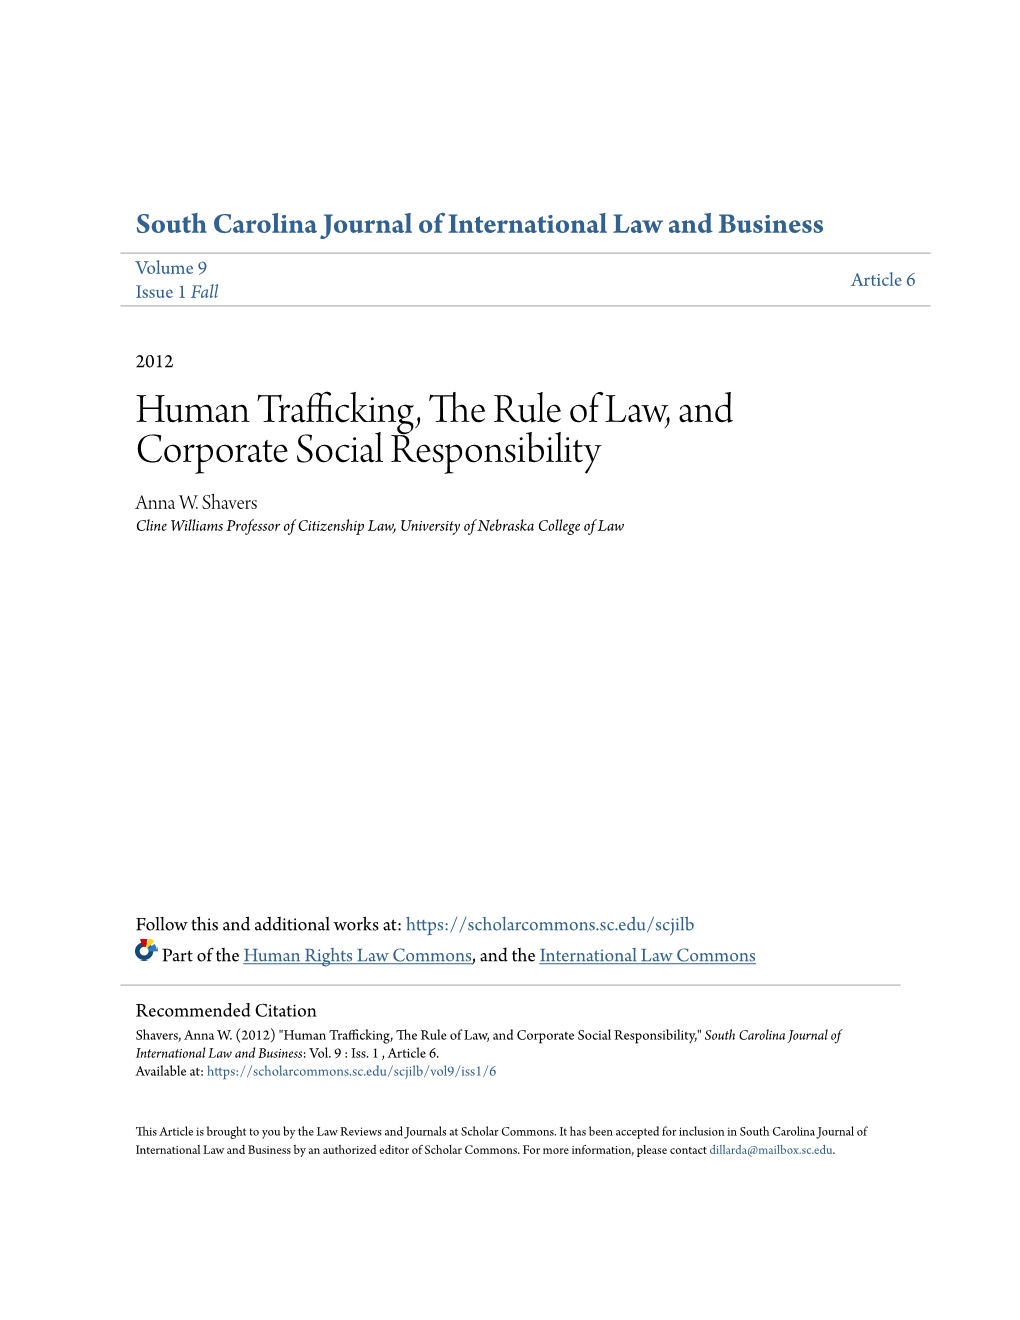 Human Trafficking, the Rule of Law, and Corporate Social Responsibility Anna W